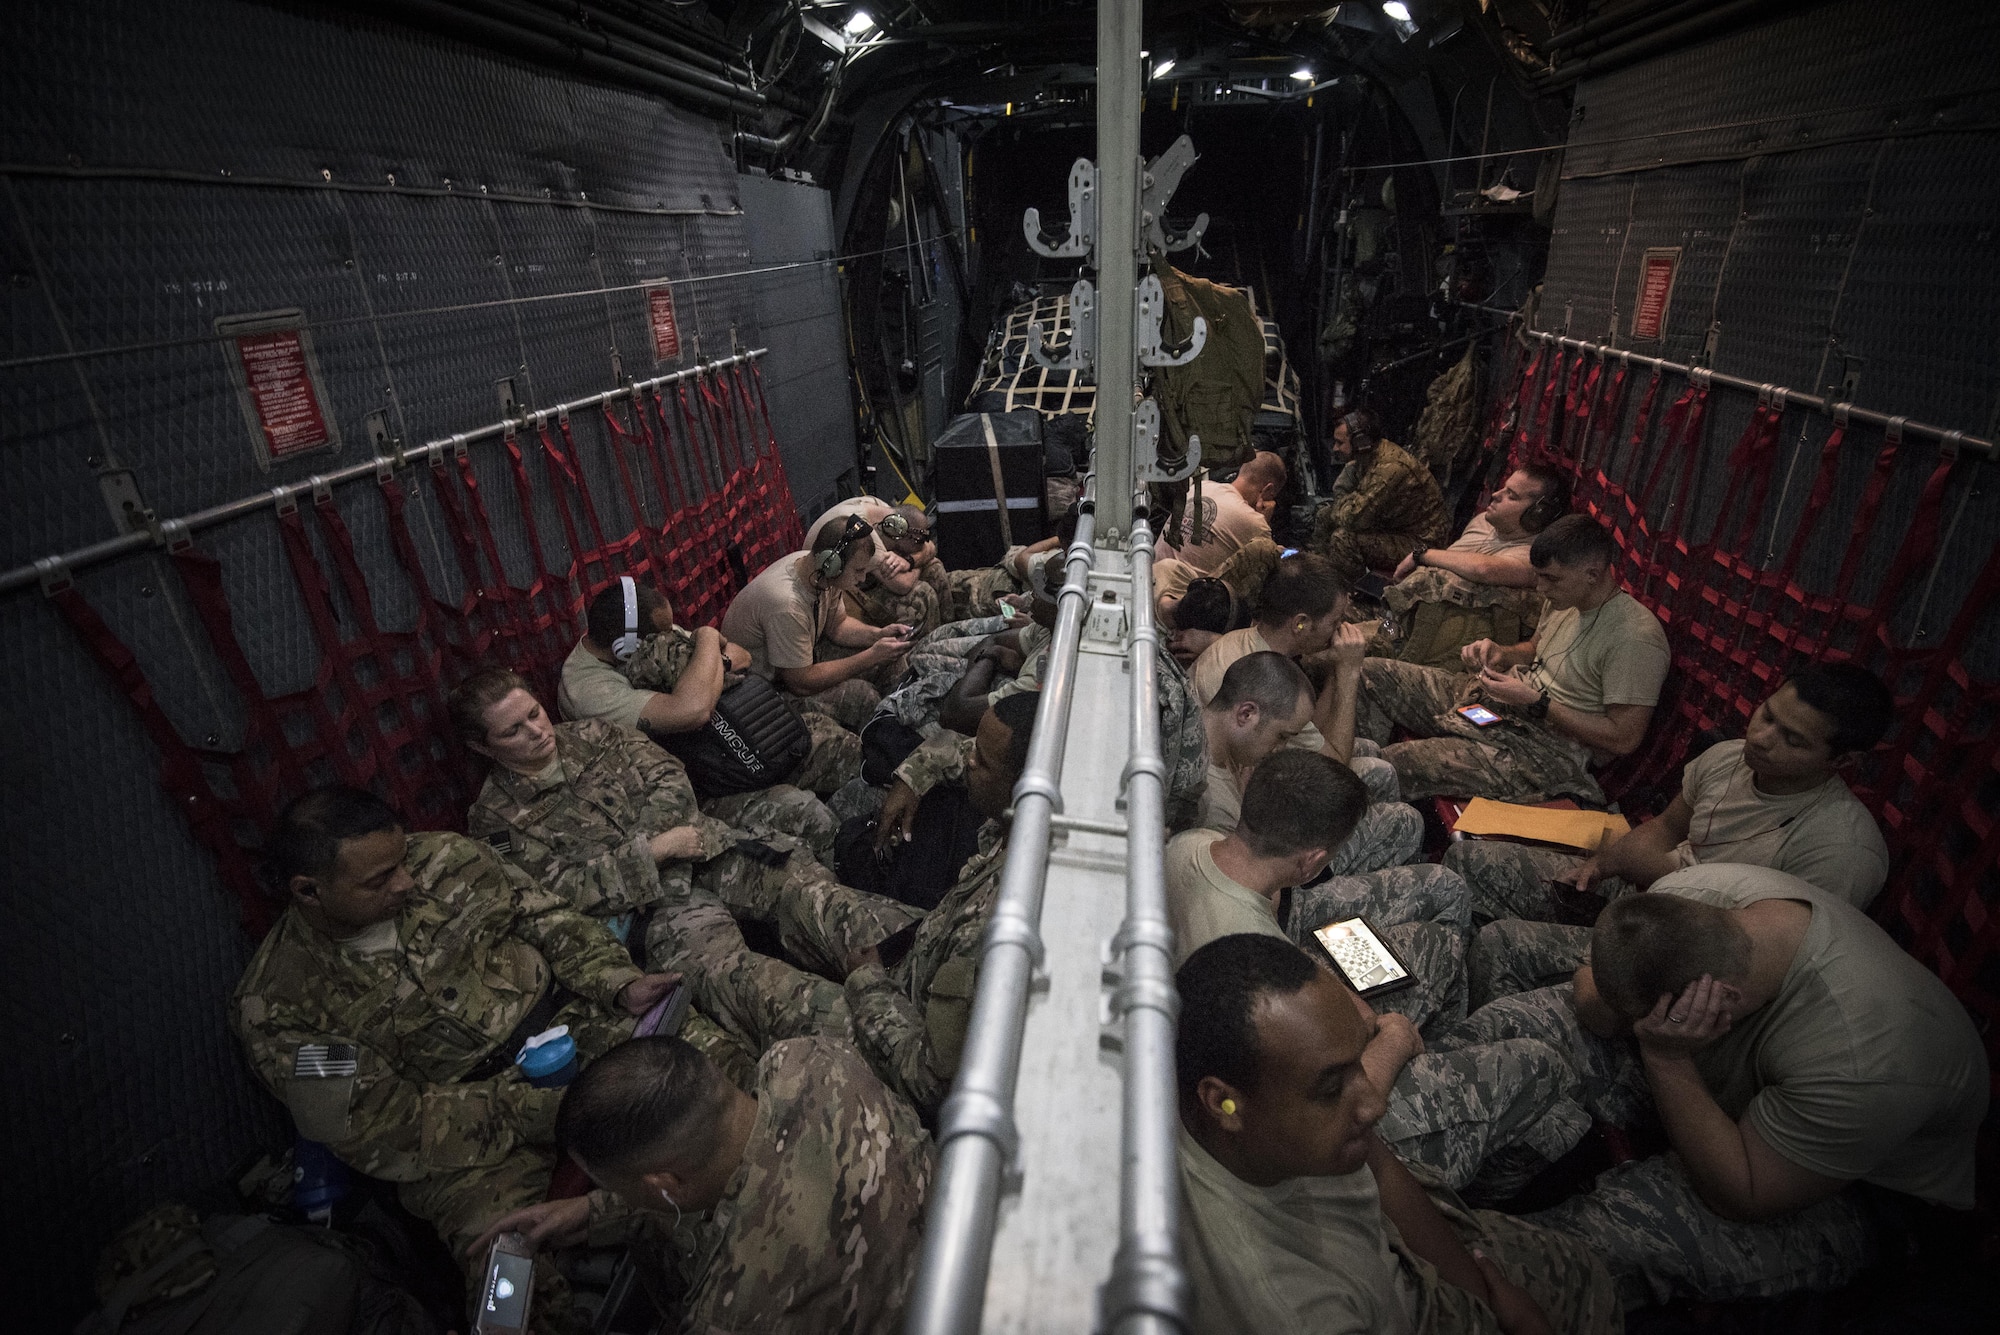 Air Commandos sit inside an MC-130H Combat Talon II en-route to Wright Patterson Air Force Base, Ohio, Aug. 15, 2016. Airmen with the 1st Special Operations Wing traveled to Wright Patterson AFB for Task Force Exercise Olympus Archer. Olympus Archer will maximize training opportunities for more than 230 Air Commandos, with an emphasis on medical and flying operations. (U.S. Air Force photo by Staff Sgt. Christopher Callaway)